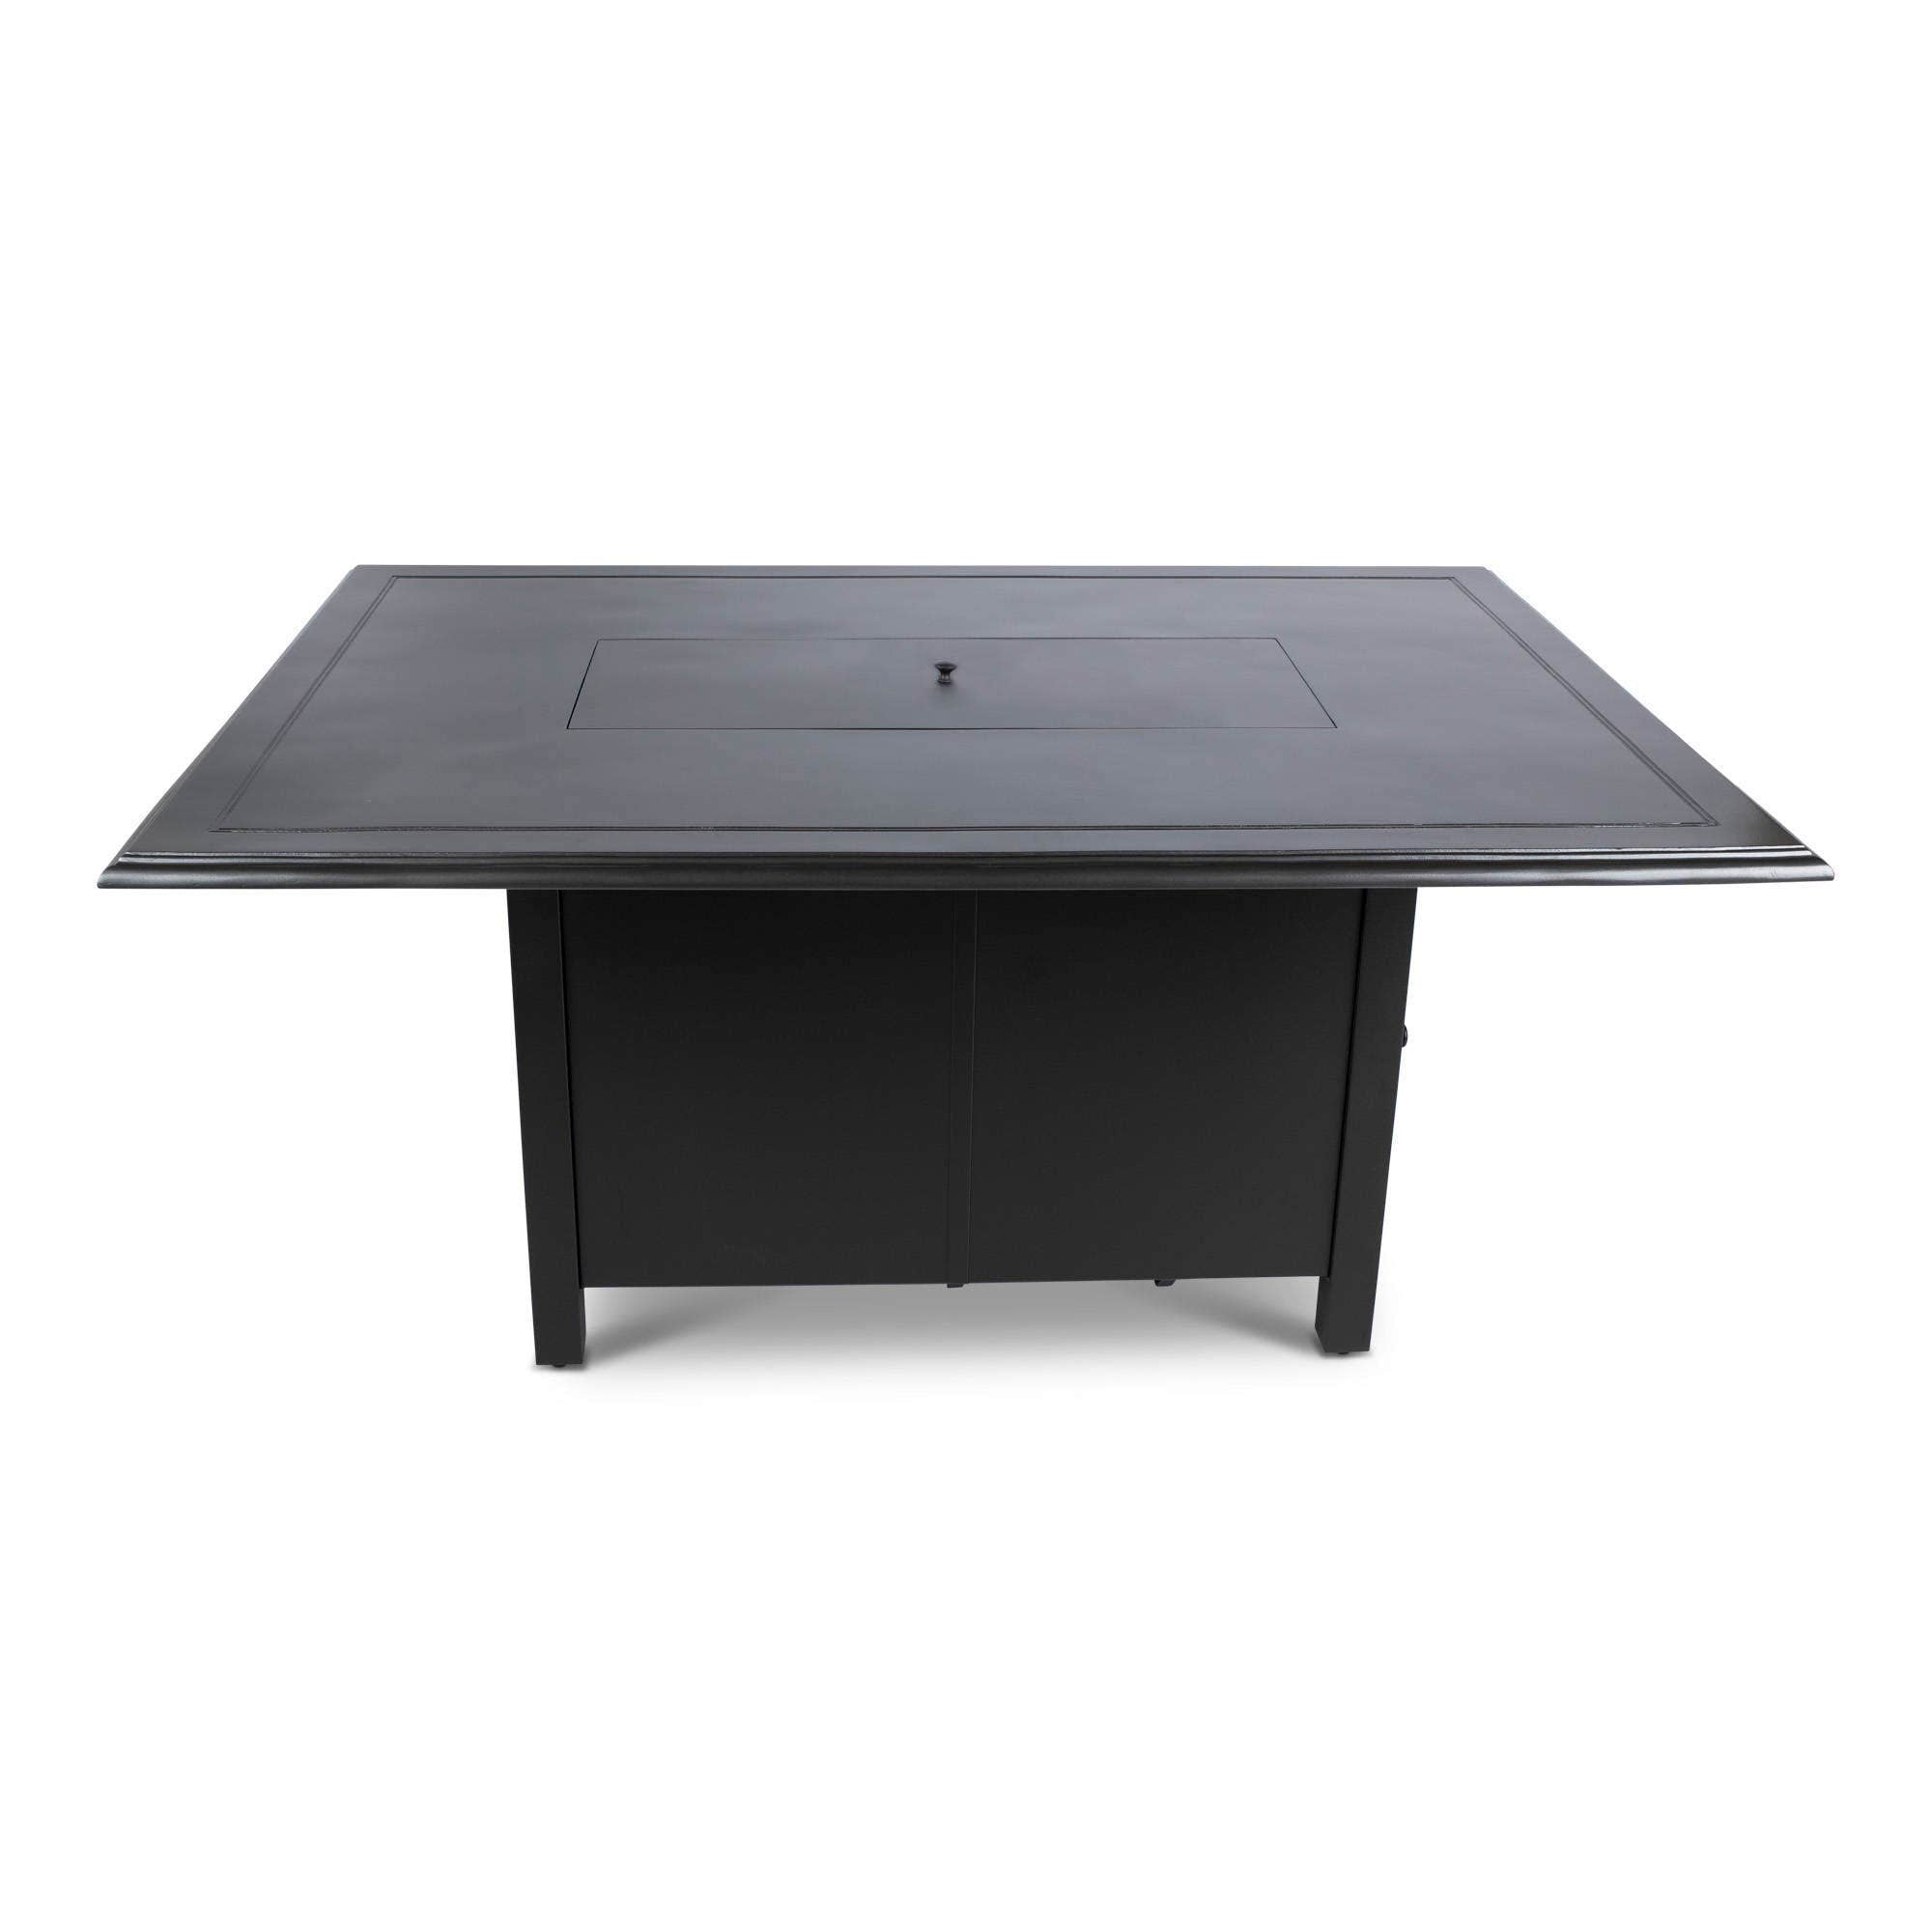 Woodard 42 inch x 60 inch Solid Cast with Beaded Edge Rectangular Chat Fire Table in Pewter and Black 12037573